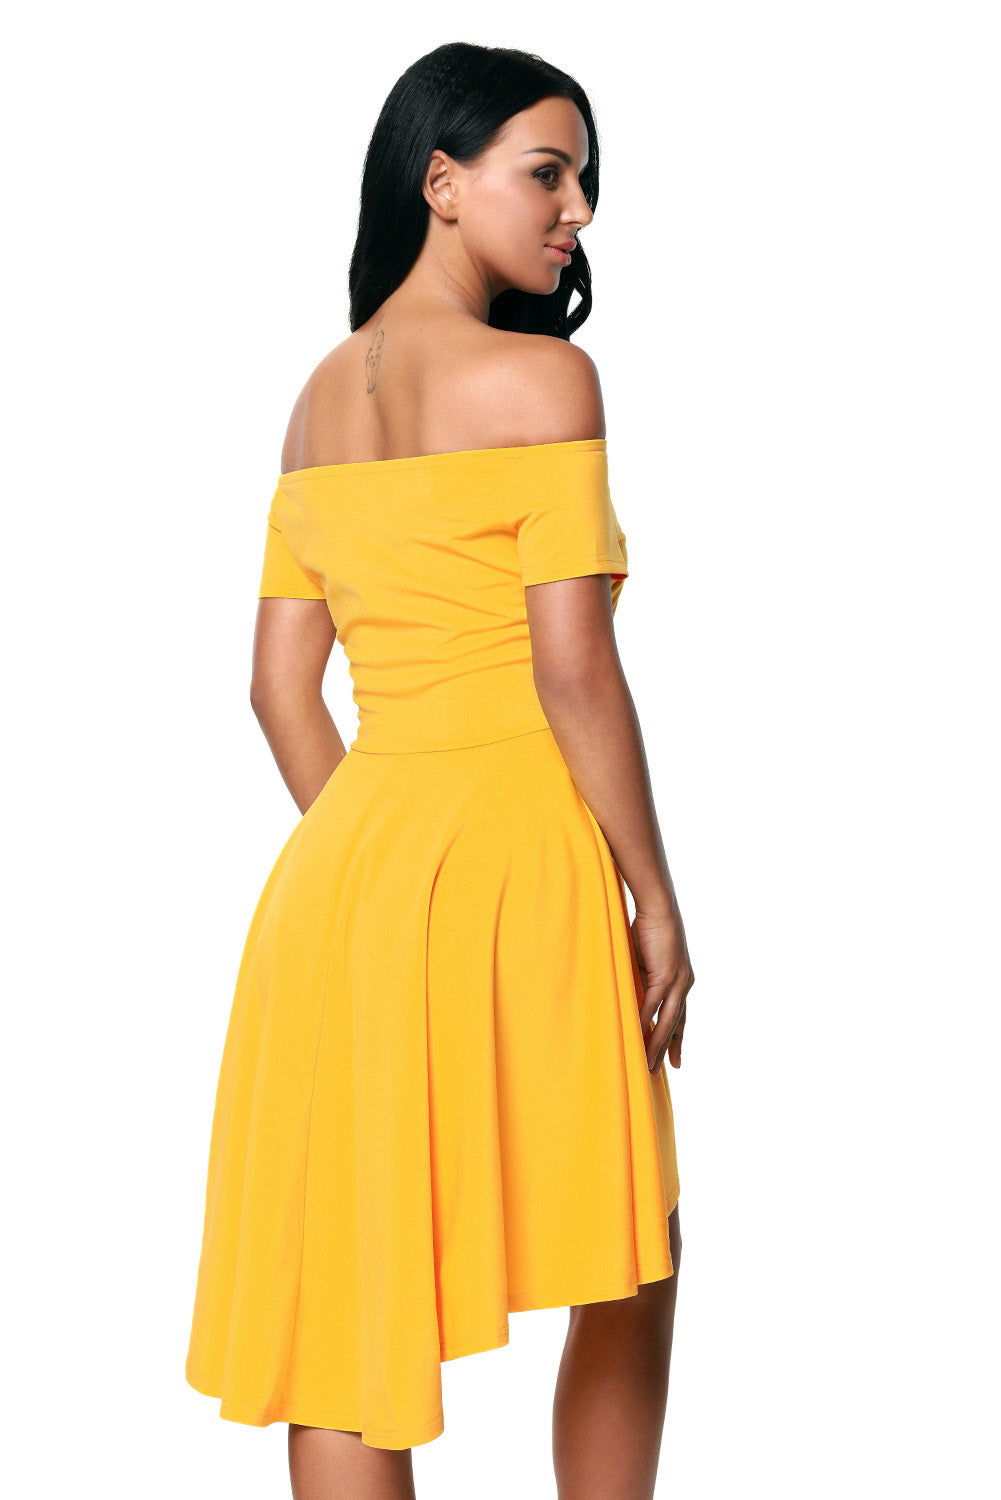 All The Rage Yellow Skater Dress